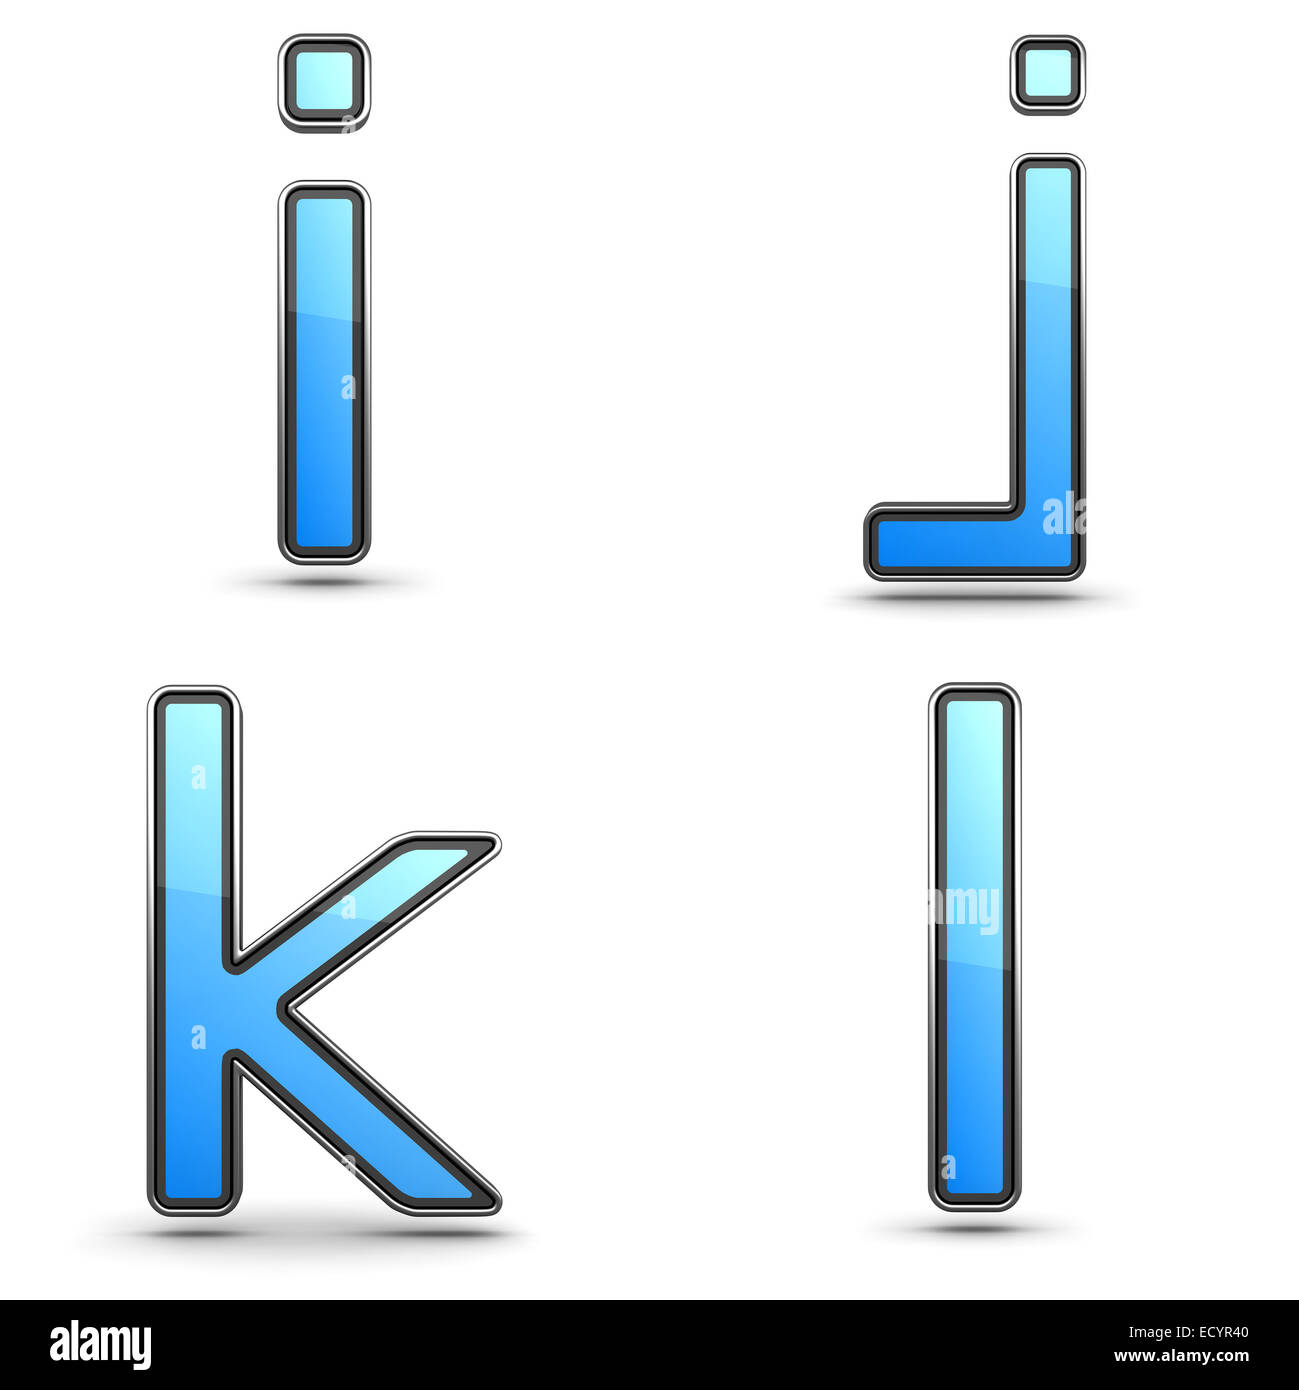 Letters I, J K, L - Set in Touchpad Style. Stock Photo